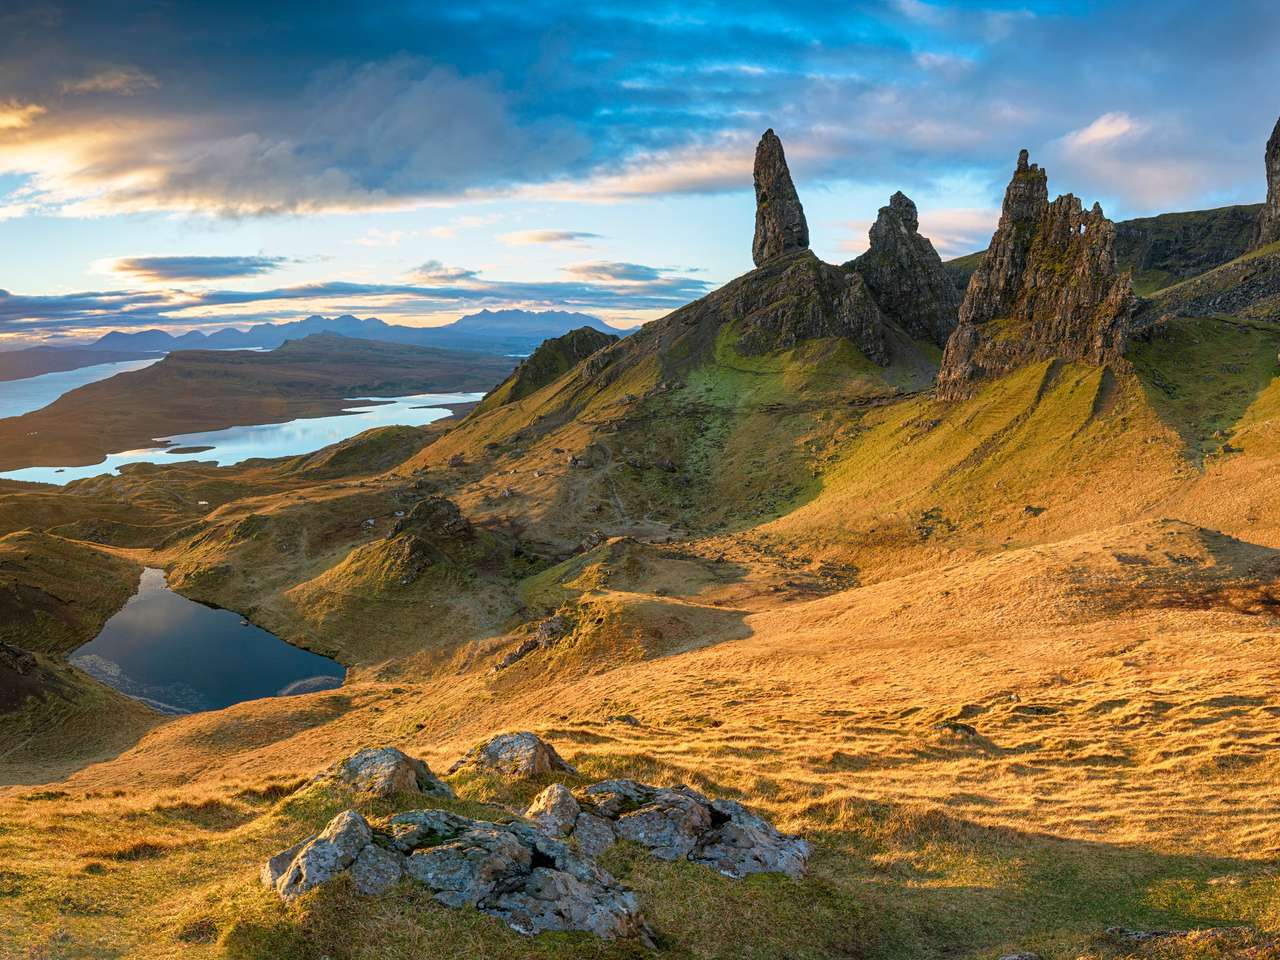 Stunning sunrise over the Old Man of Storr rock online puzzle